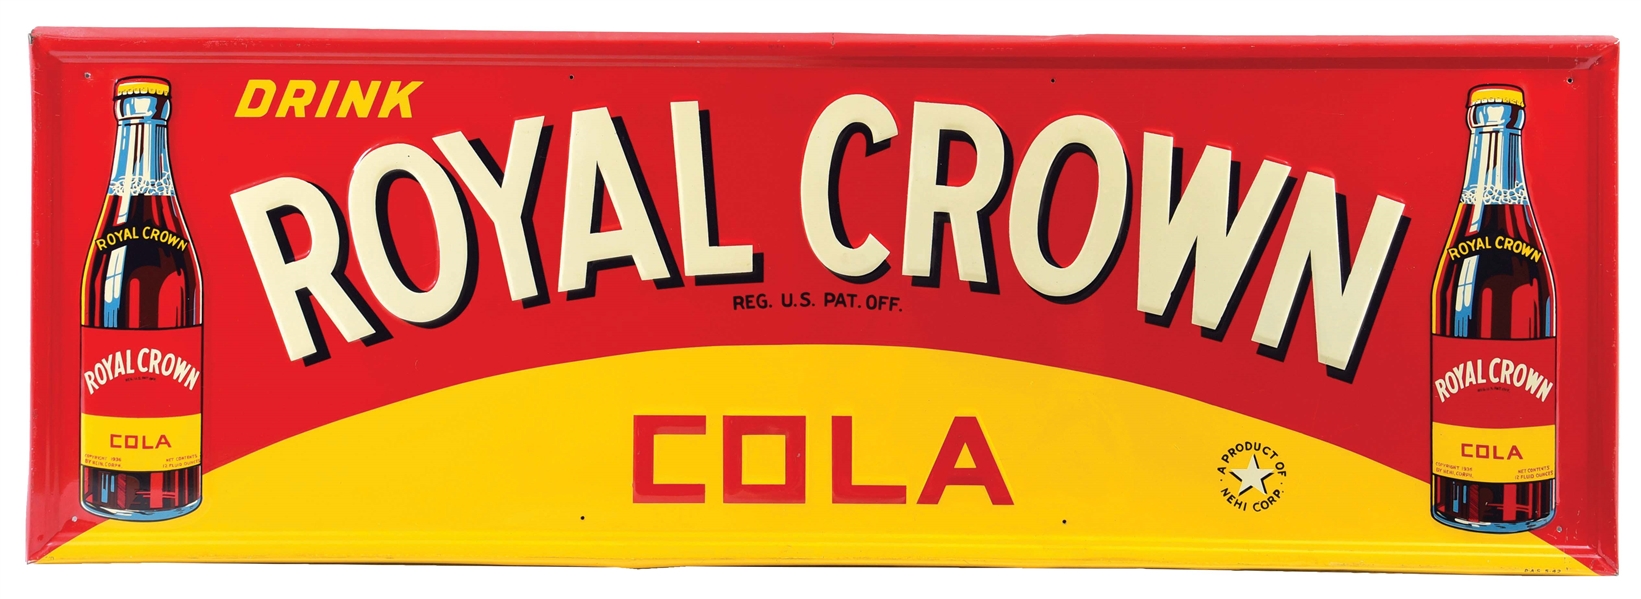 OUTSTANDING "DRINK ROYAL CROWN COLA" SELF-FRAMED EMBOSSED TIN SIGN W/ DOUBLE BOTTLE GRAPHIC.